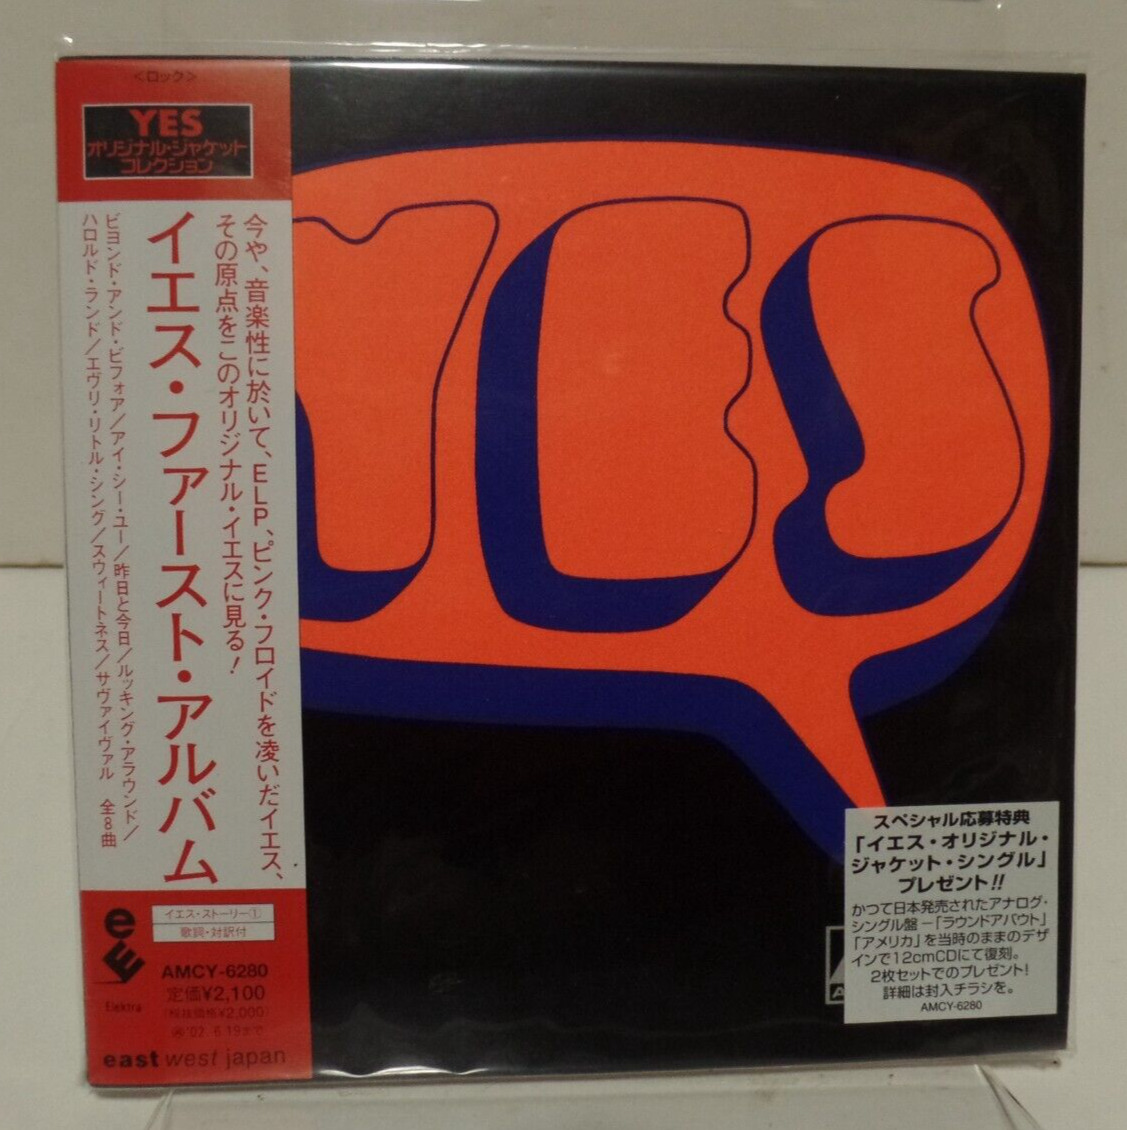 YES by YES HDCD Mini LP Japan Import w/OBI CD 2001 AMCY-6280 New